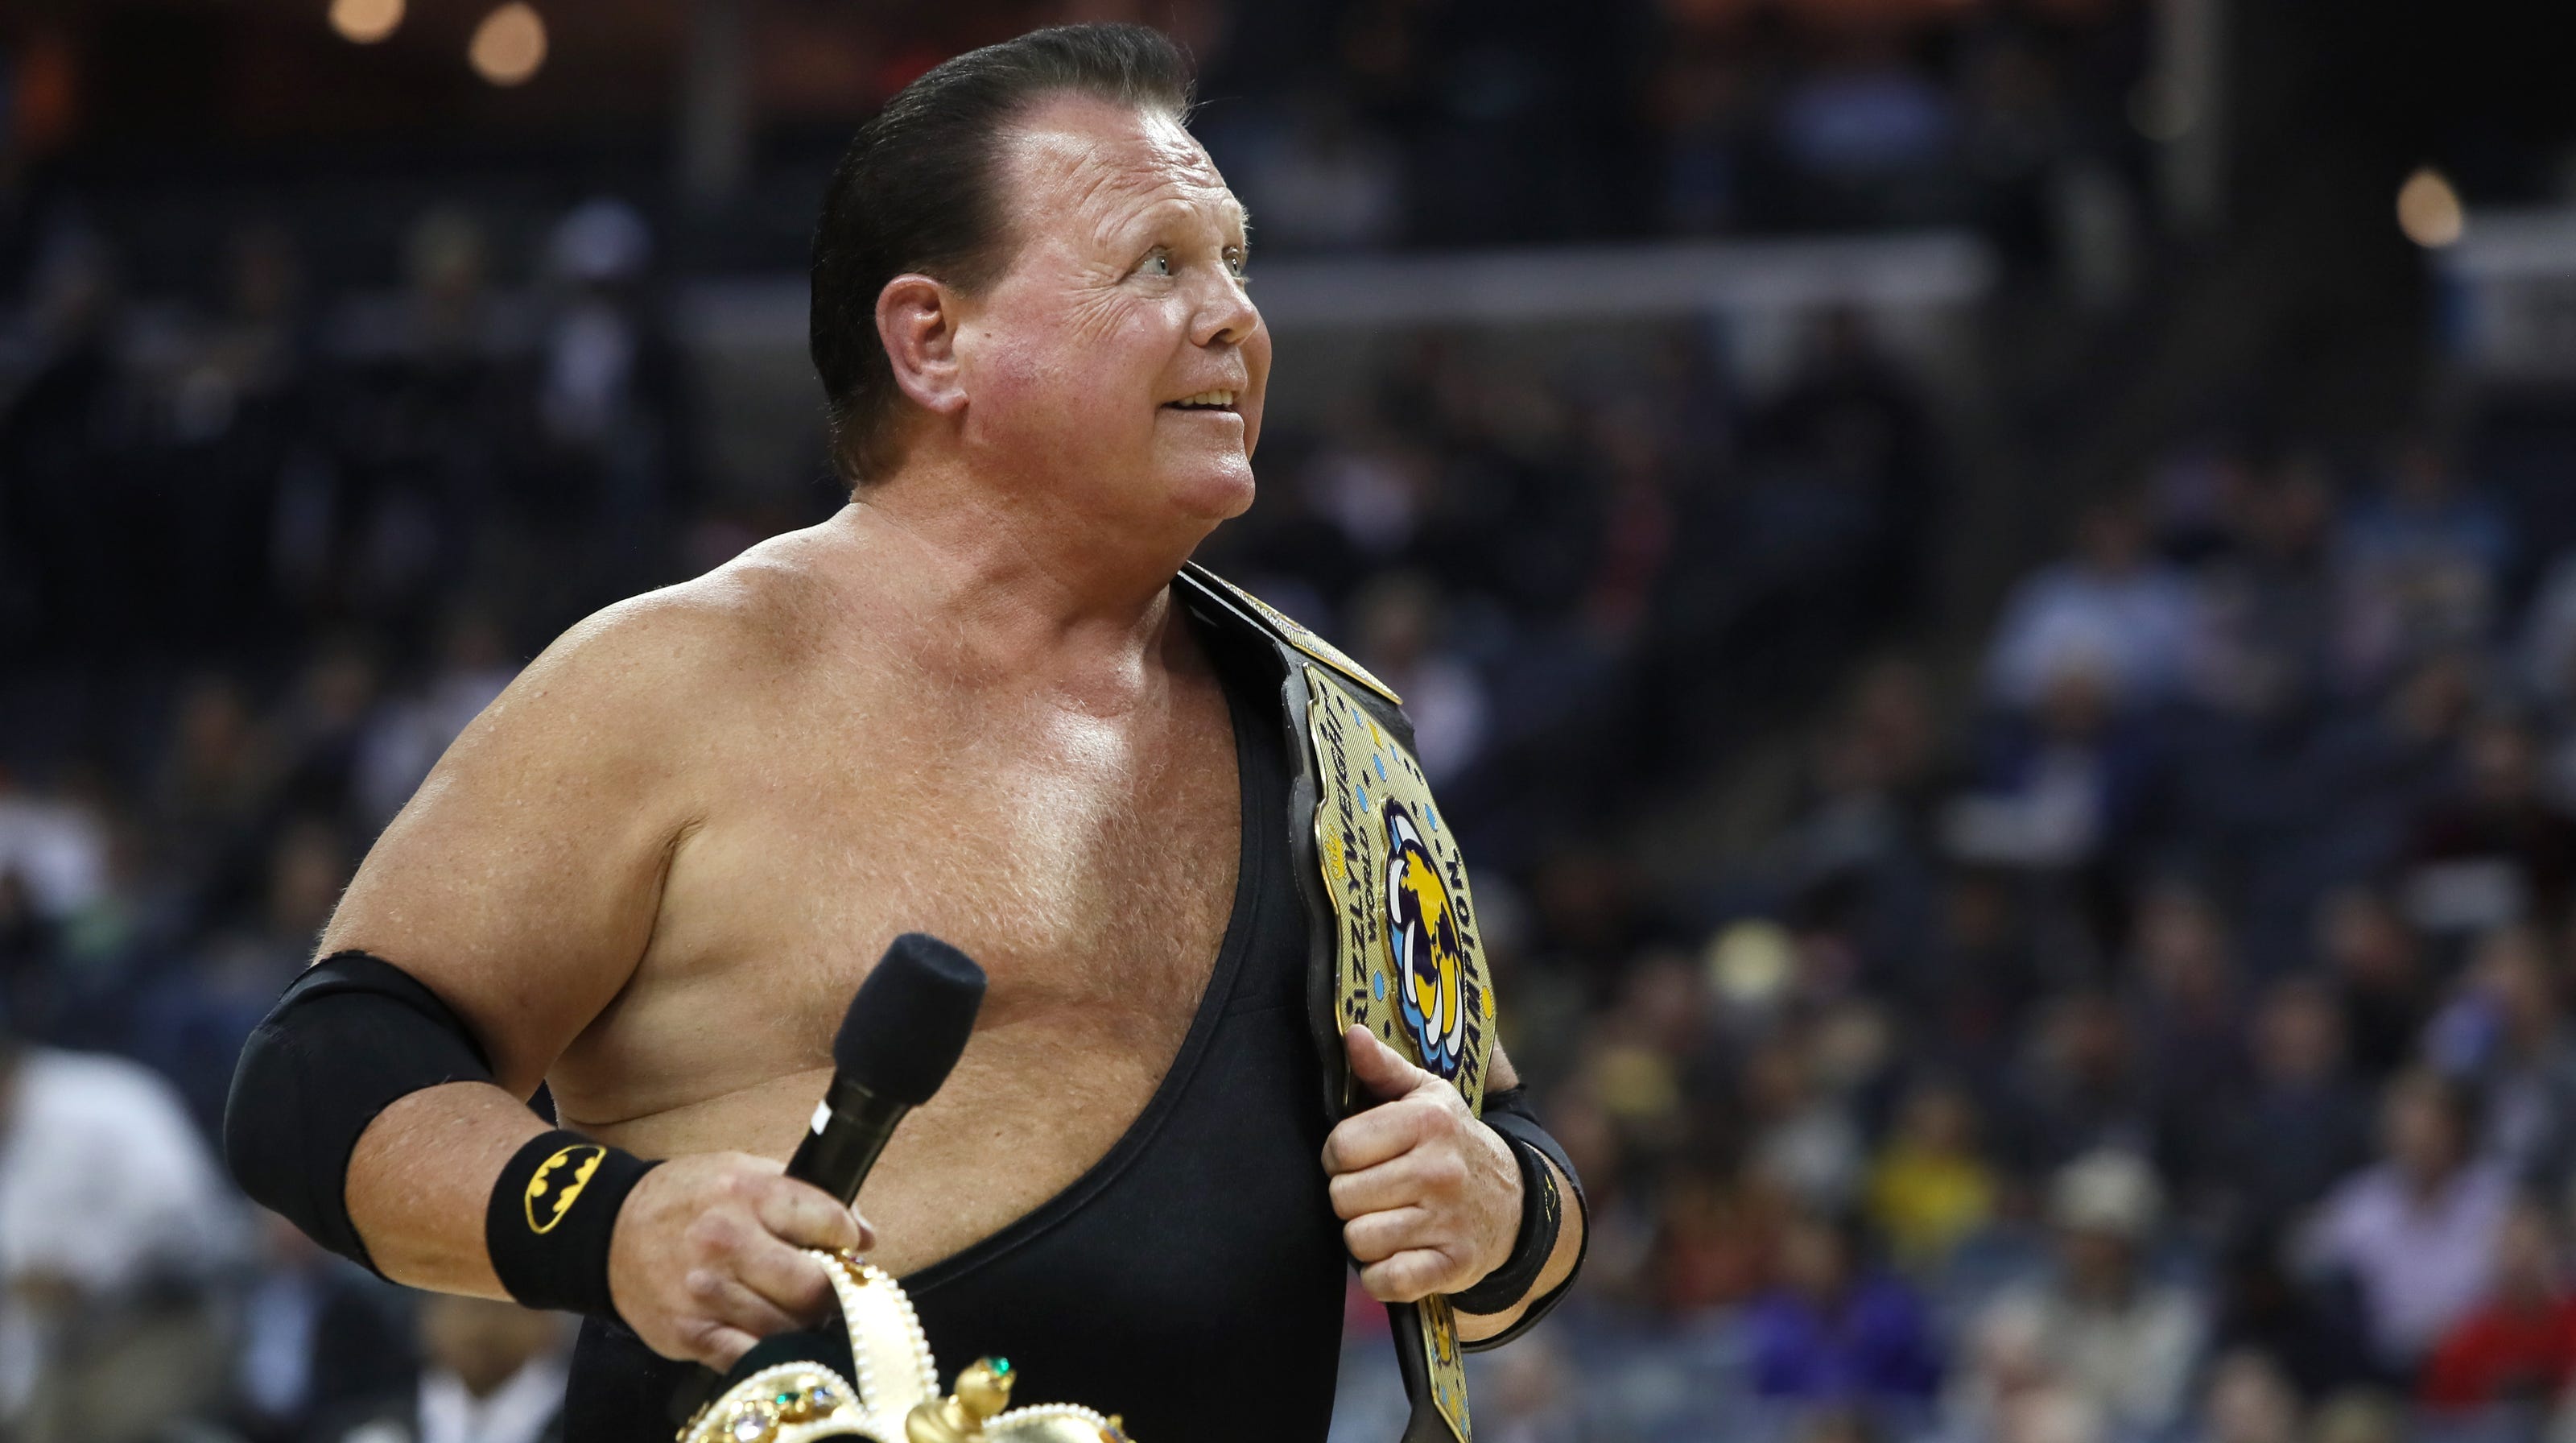 WWE 'Raw' Memphis' Jerry "The King" Lawler joins announce team